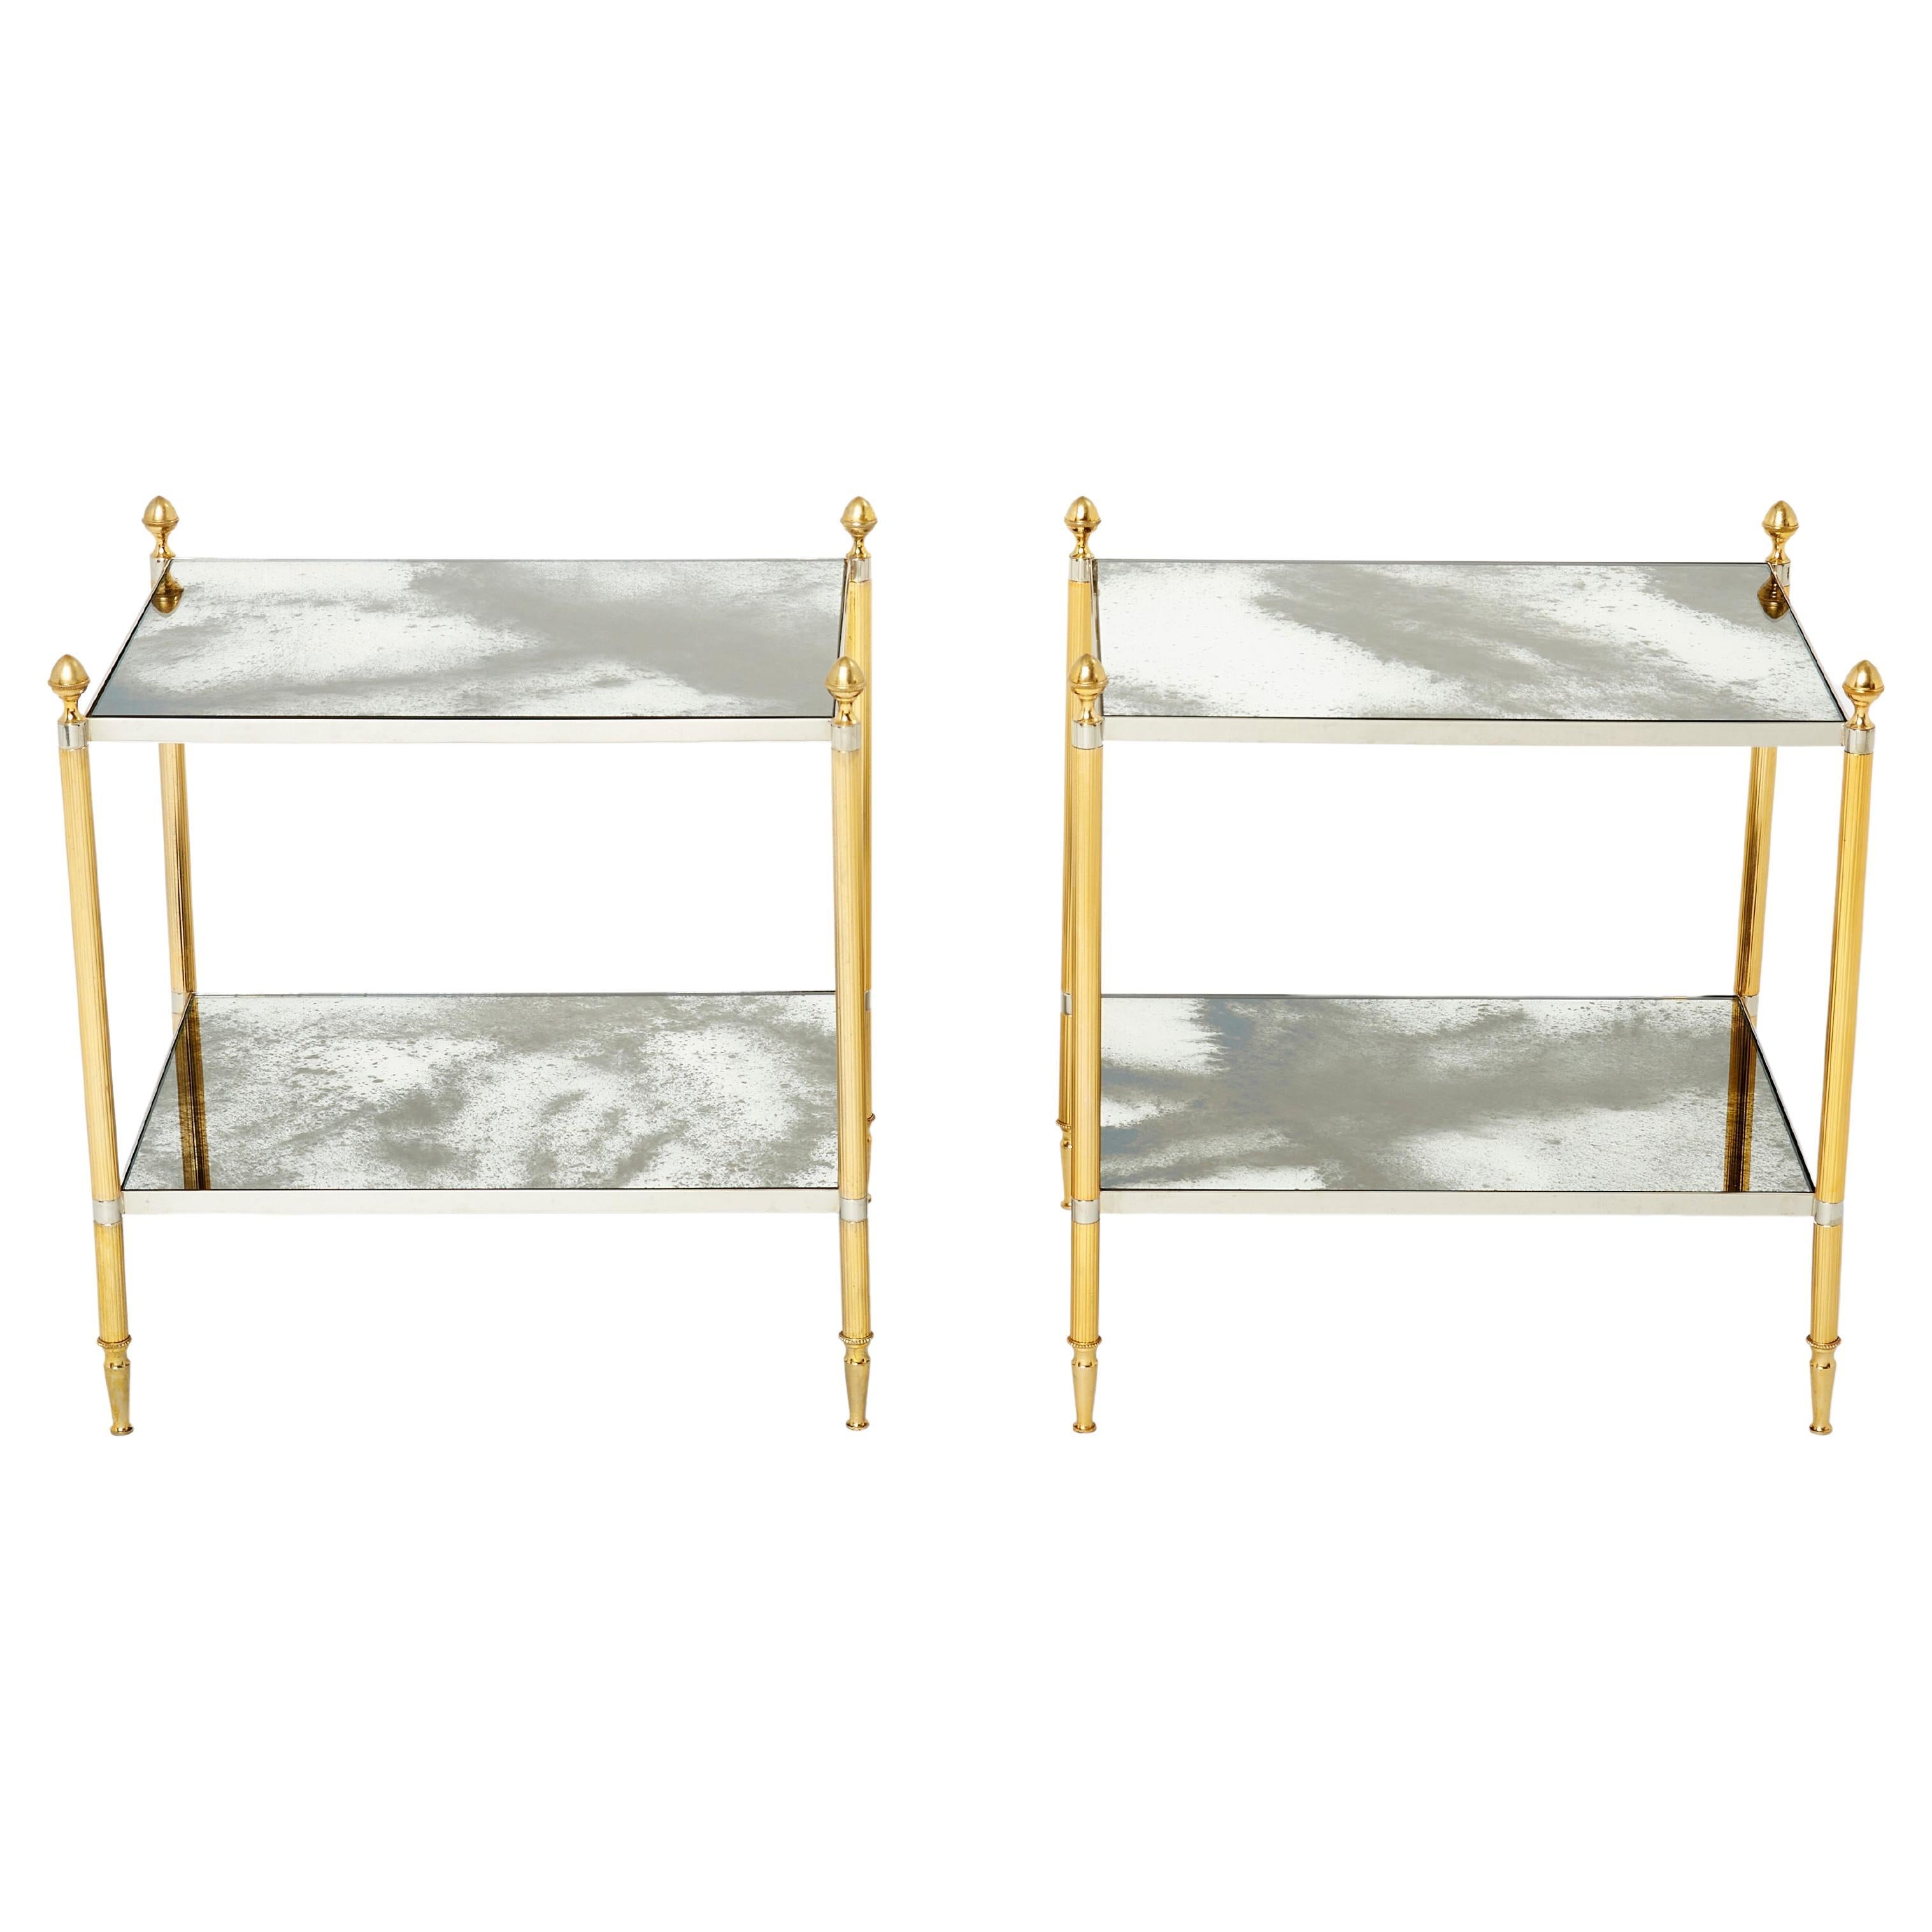 Maison Jansen Pair of Brass Chrome Mirrored Two-Tier End Tables, 1970s